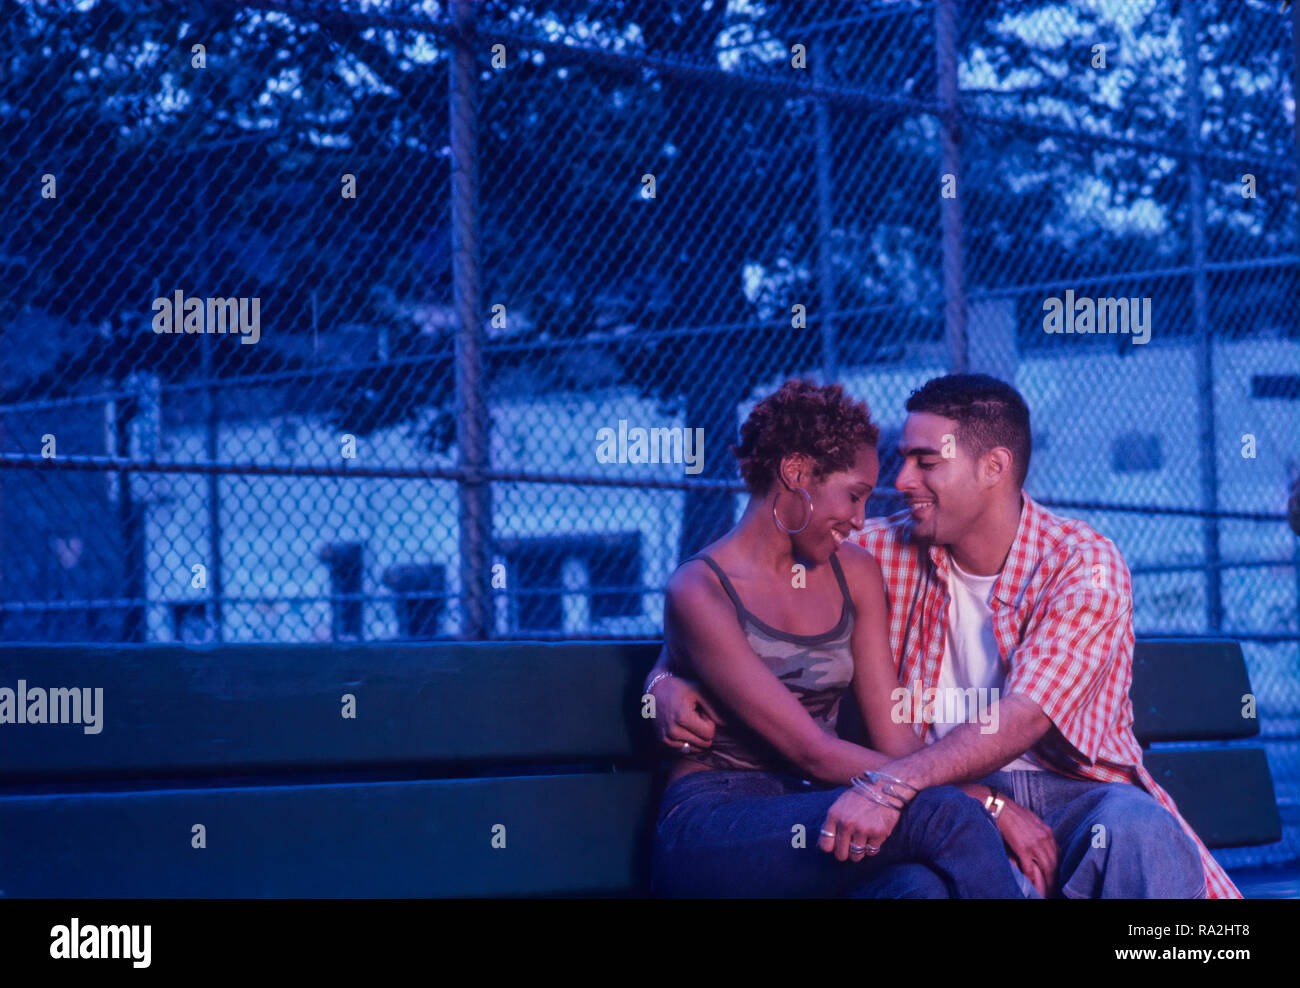 Young Urban ethnic couple flirting on a park bench at dusk or early evening Stock Photo